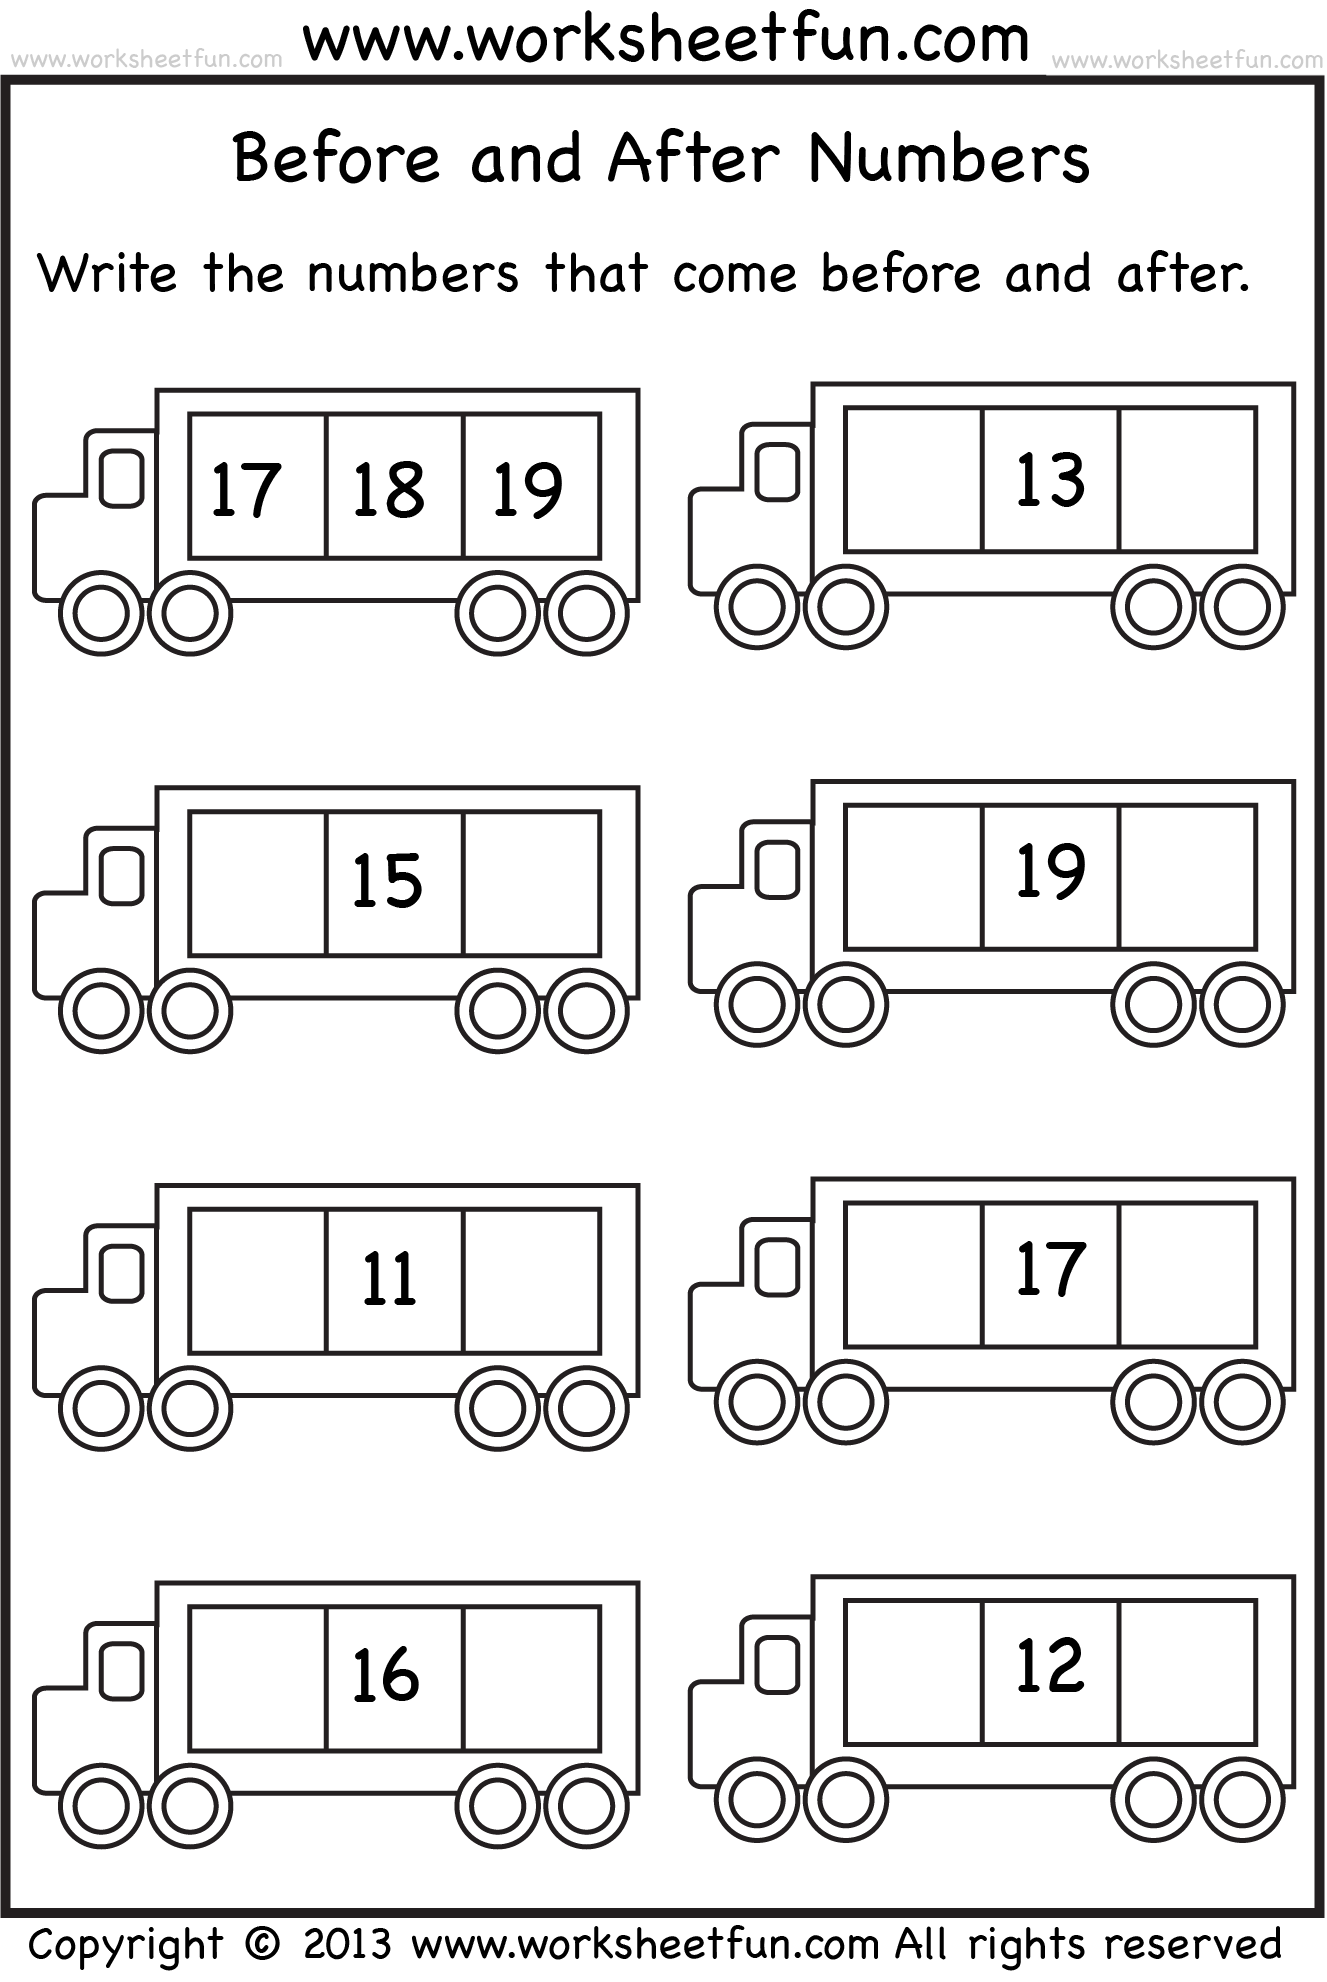 before-and-after-numbers-5-worksheets-free-printable-worksheets